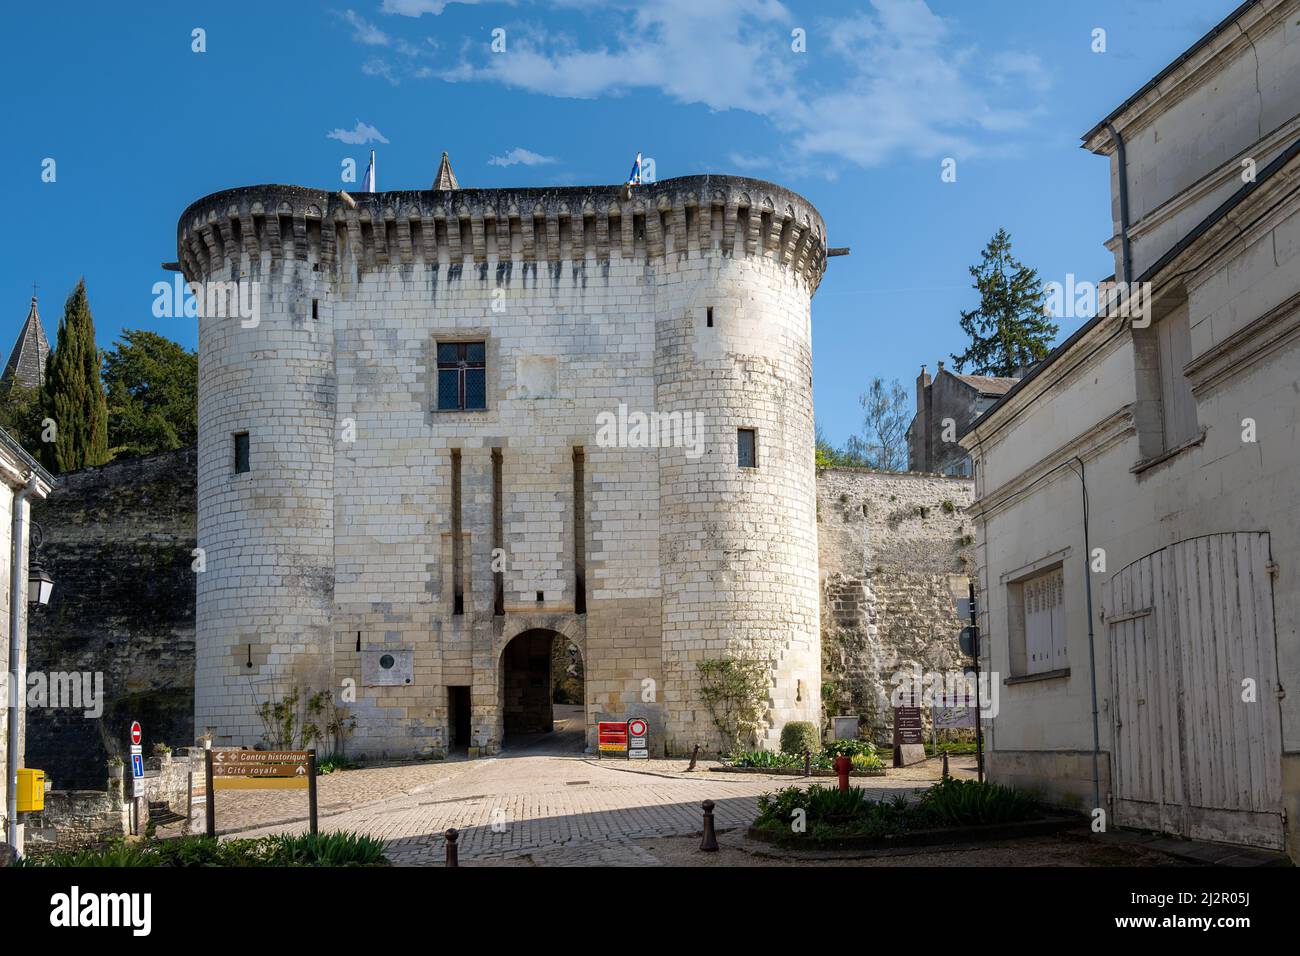 Porte Royale or Royal Gate in the royal city of Loches, Touraine, France Stock Photo